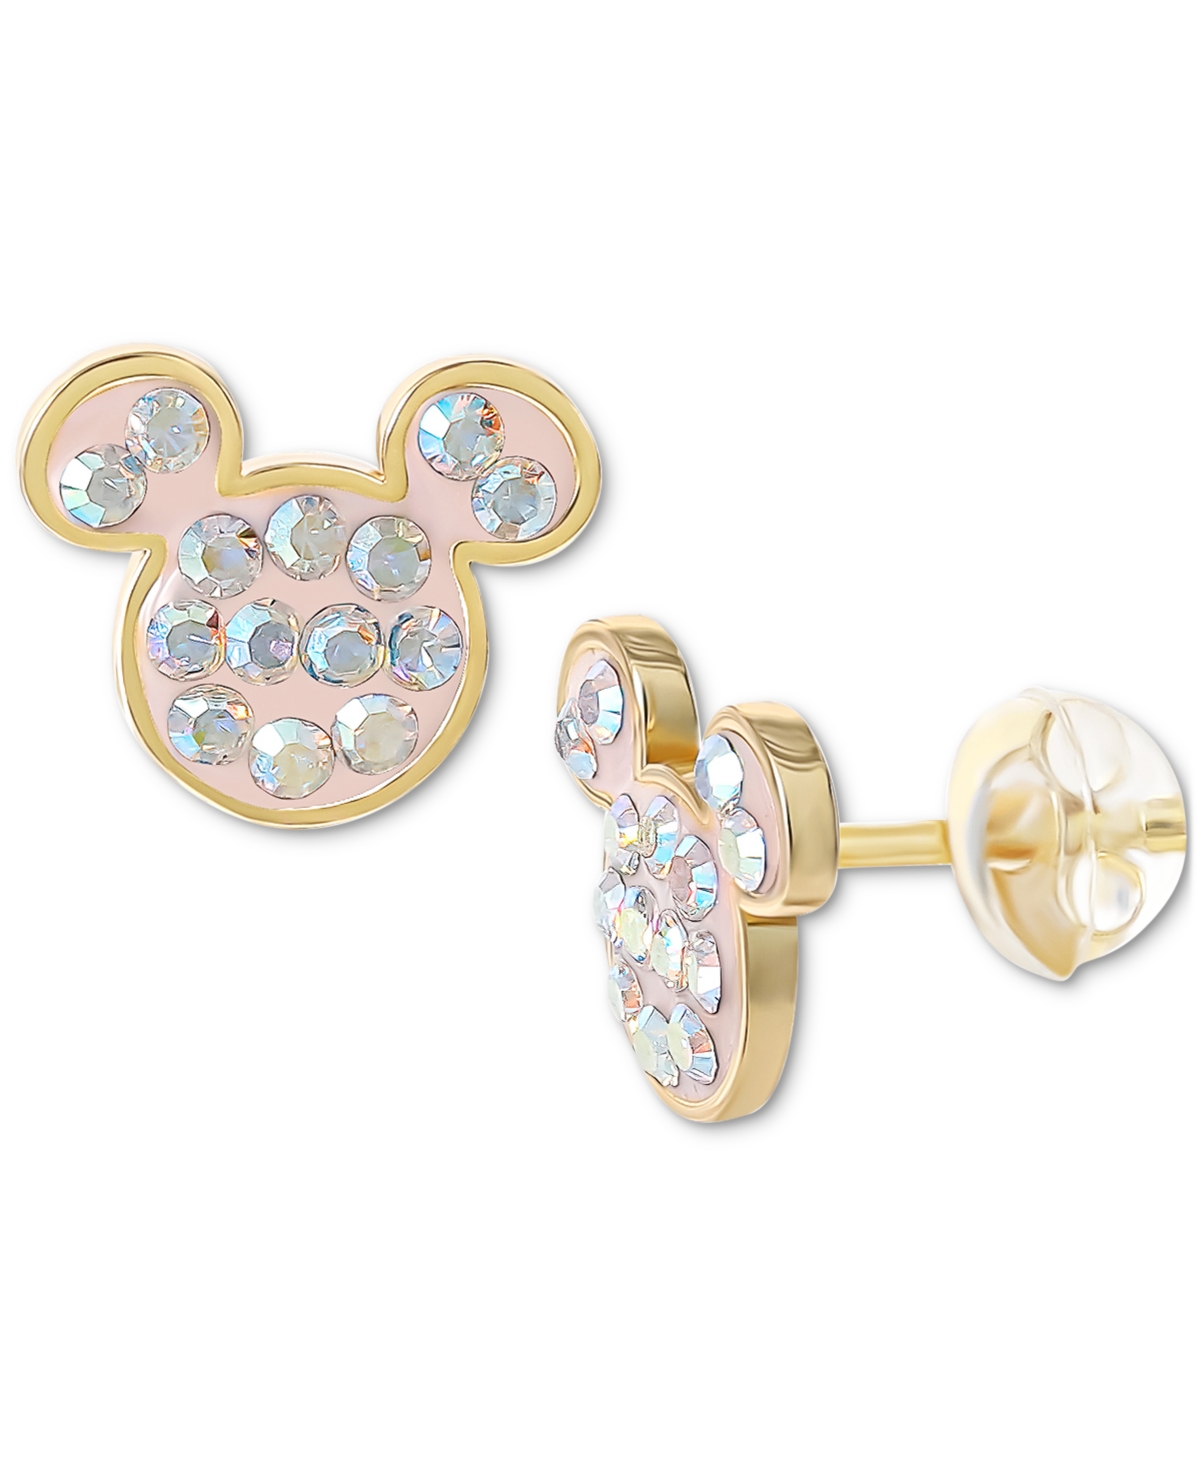 Disney Crystal Mickey Mouse Stud Earrings In 18k Gold-plated Sterling Silver In Gold Over Silver